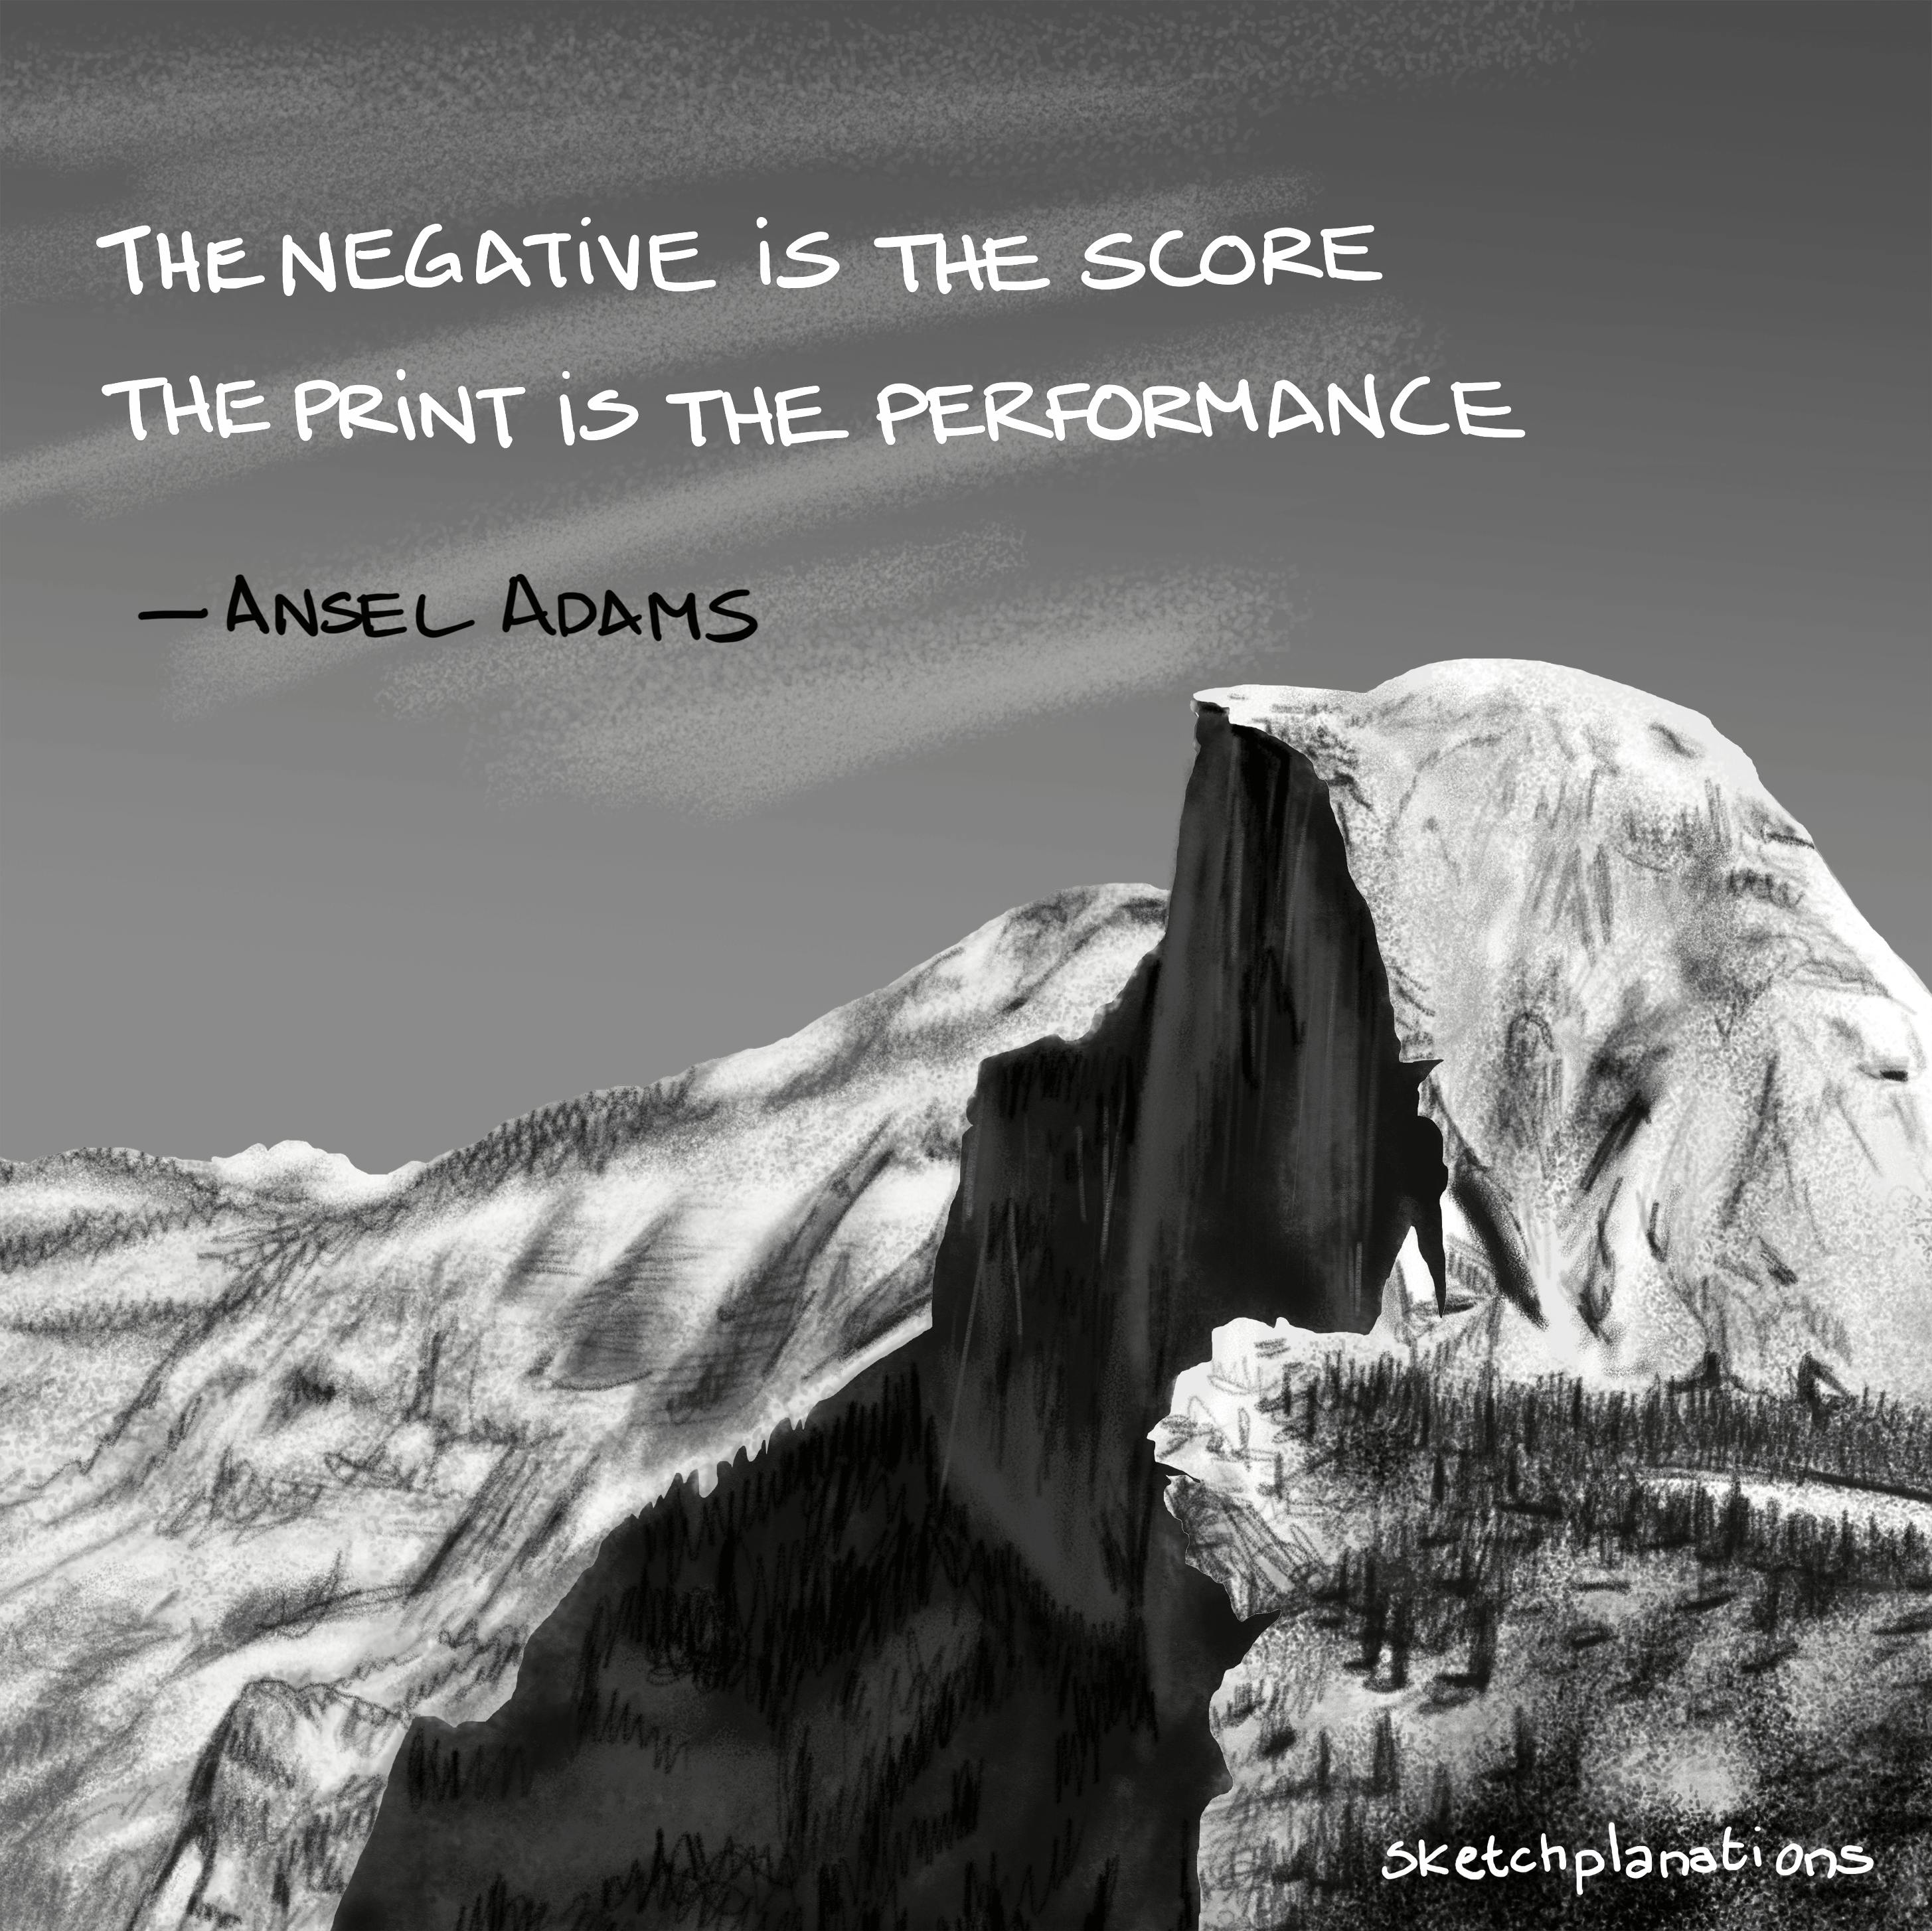 Prints and Performances illustration: a black and white artistic representation of the Half Dome rock formation in Yosemite National Park, California. The peak is named for its distinct shape; one side is a sheer face while the other three sides are smooth and round, making it appear like a dome cut in half. The image is accompanied by a quote from celebrated American photographer, Ansel Adams. 